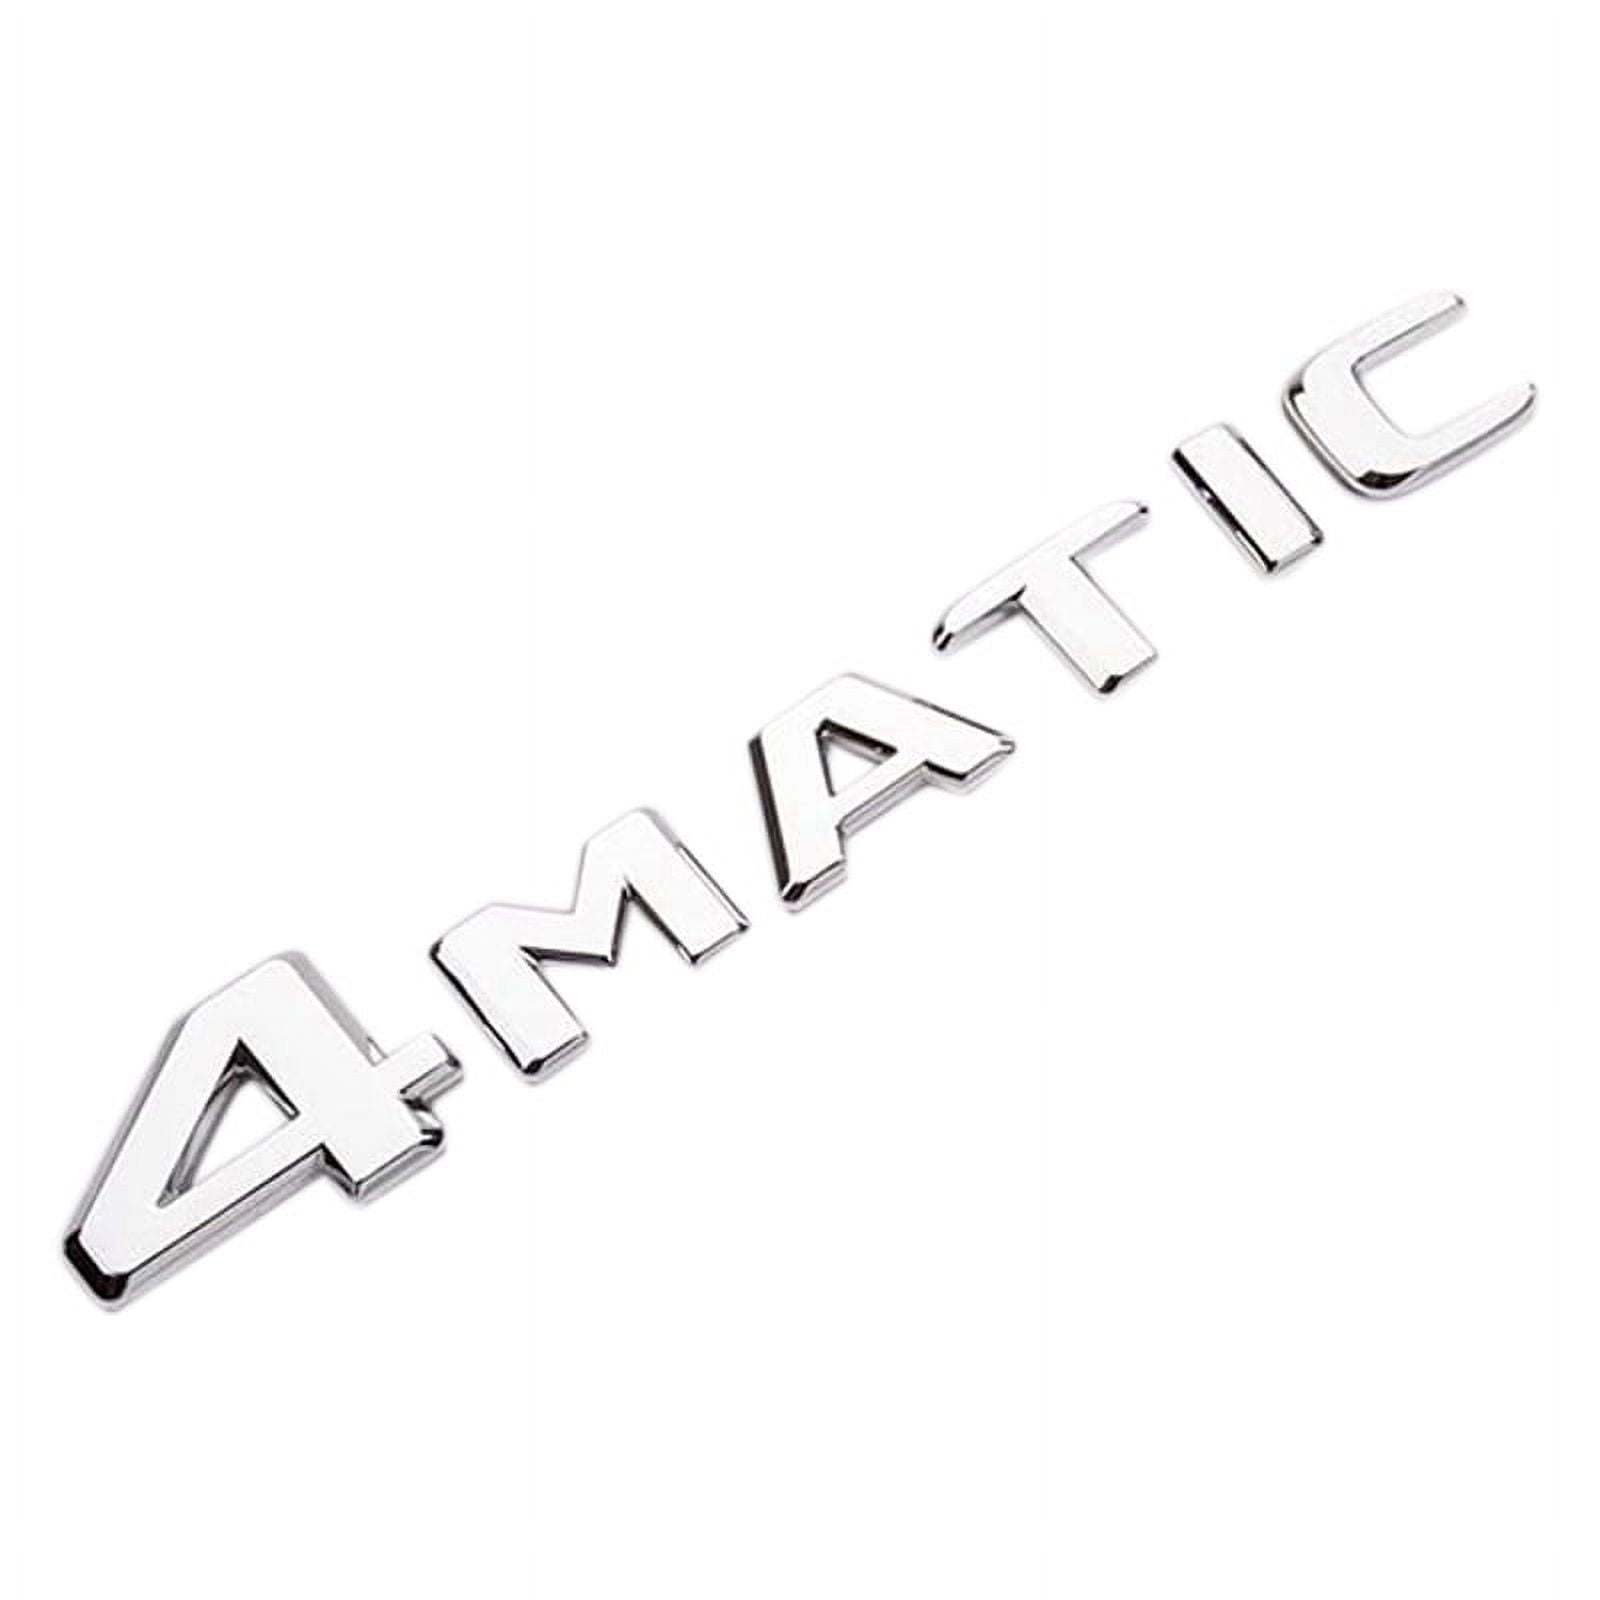 4MATIC Silver Auto Trunk Door Bumper Badge Decal Emblem Adhesive Tape  Sticker Replacement for 